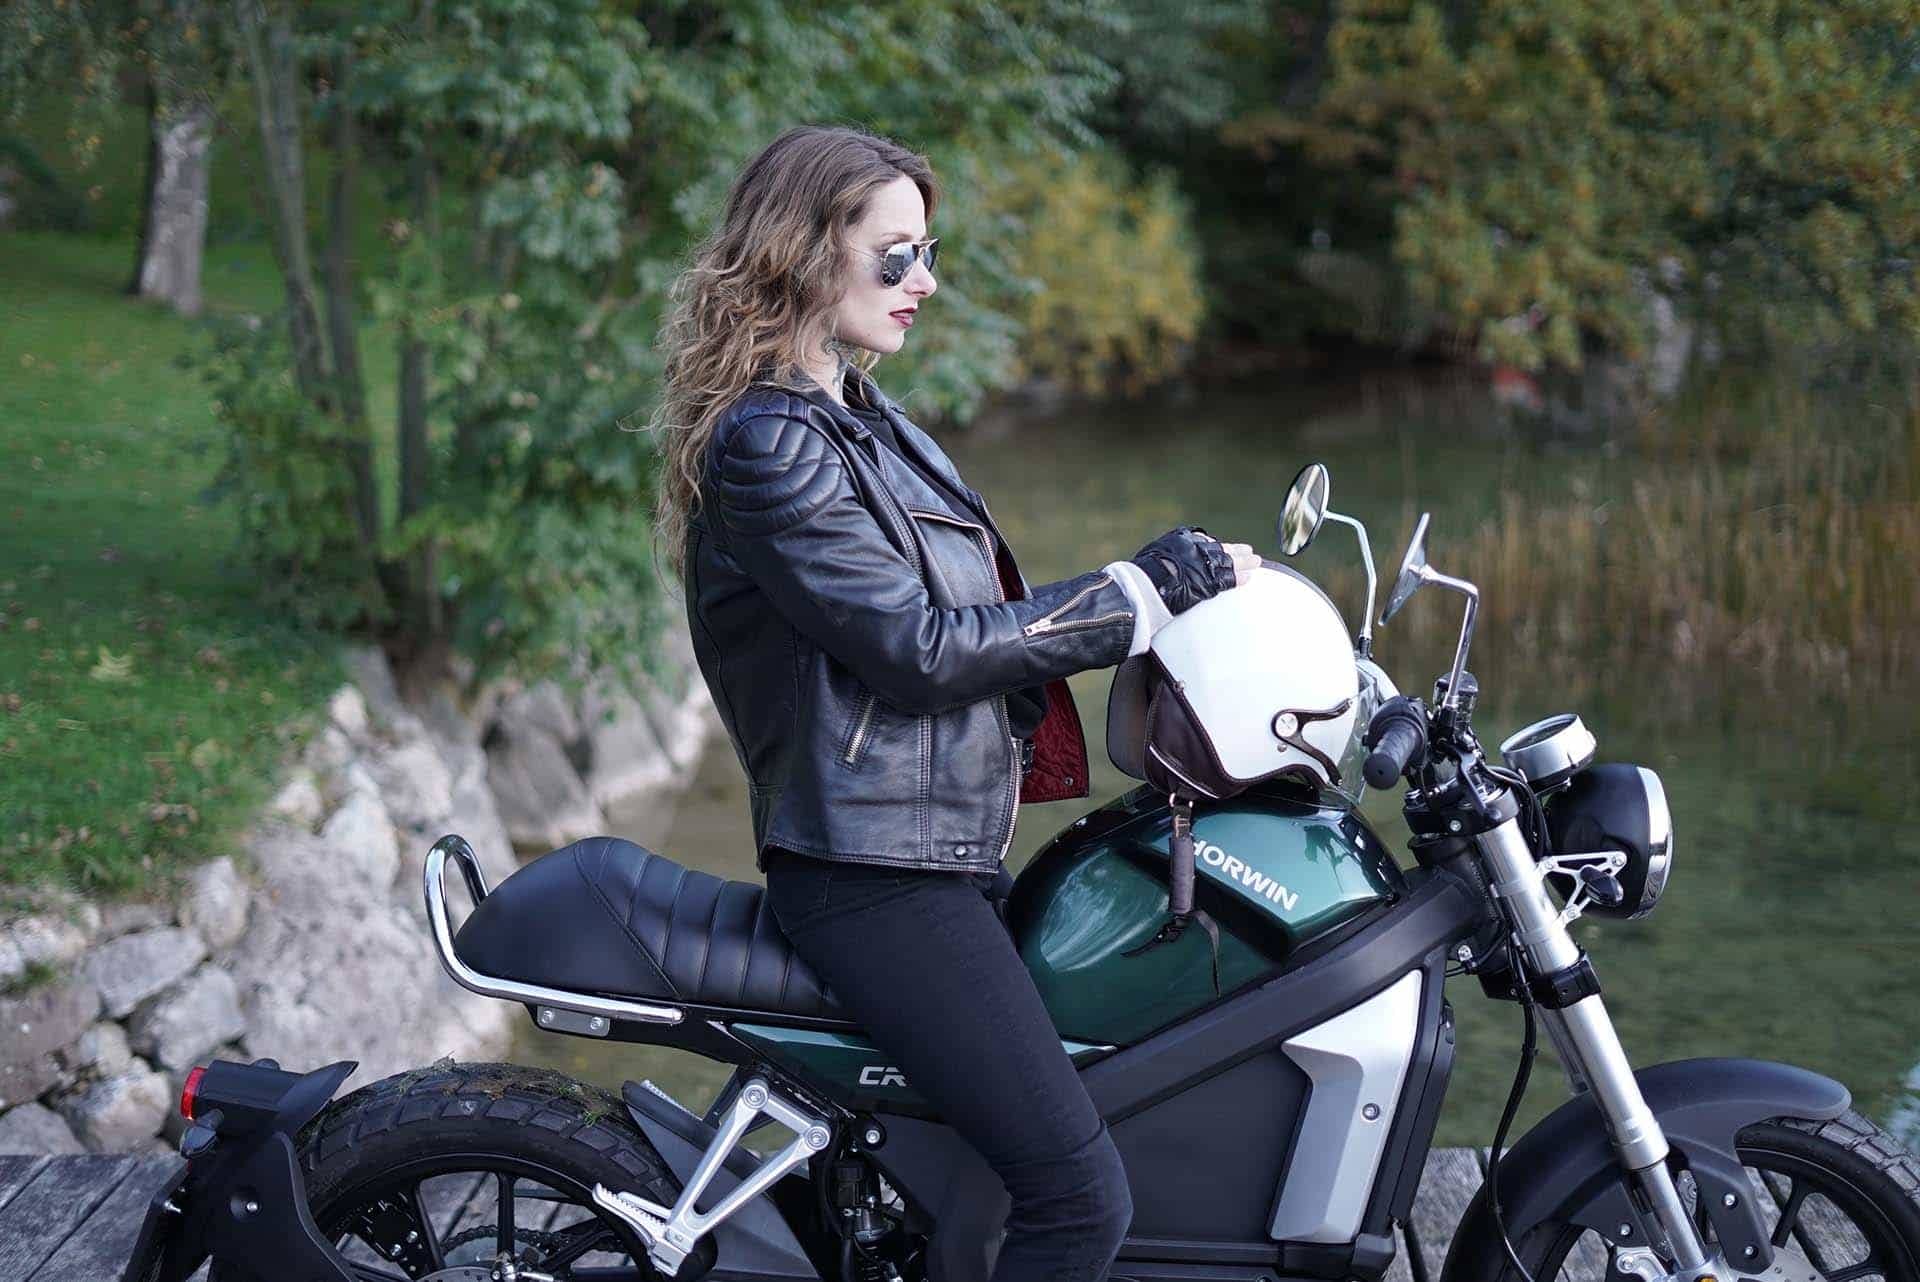 Lady straddling green Horwin motorcycle with white helmet by water